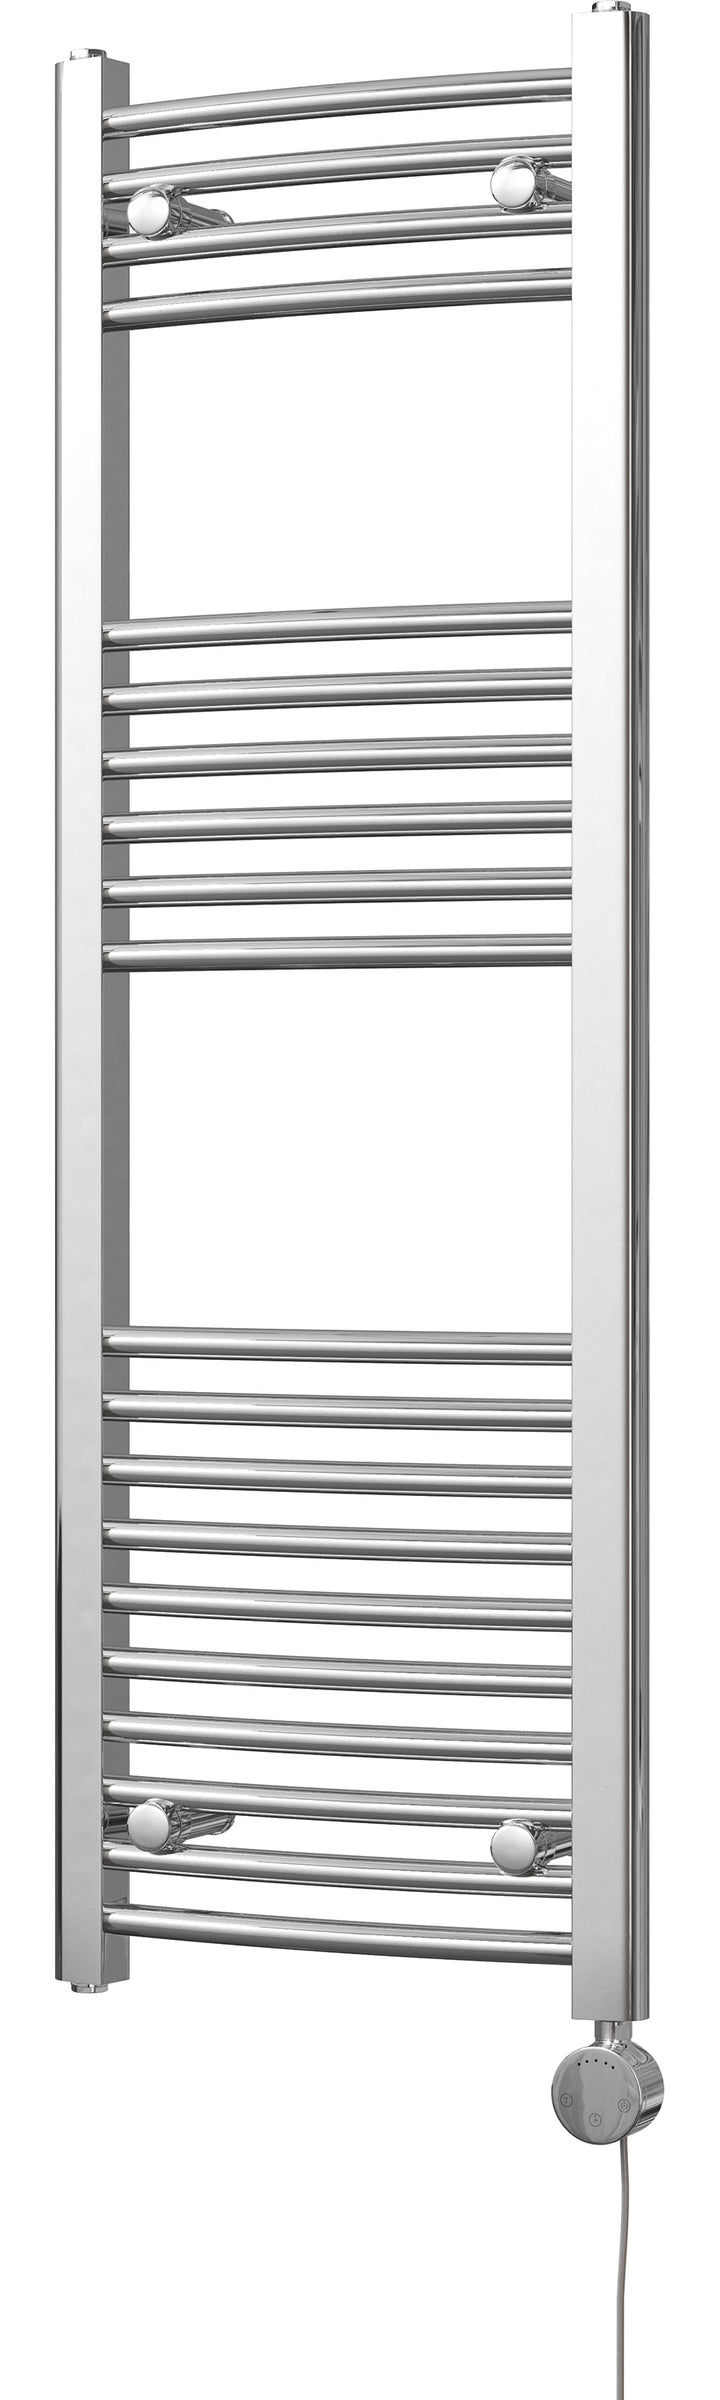 Zennor - Chrome Electric Towel Rail H1200mm x W400mm Curved 300w Thermostatic